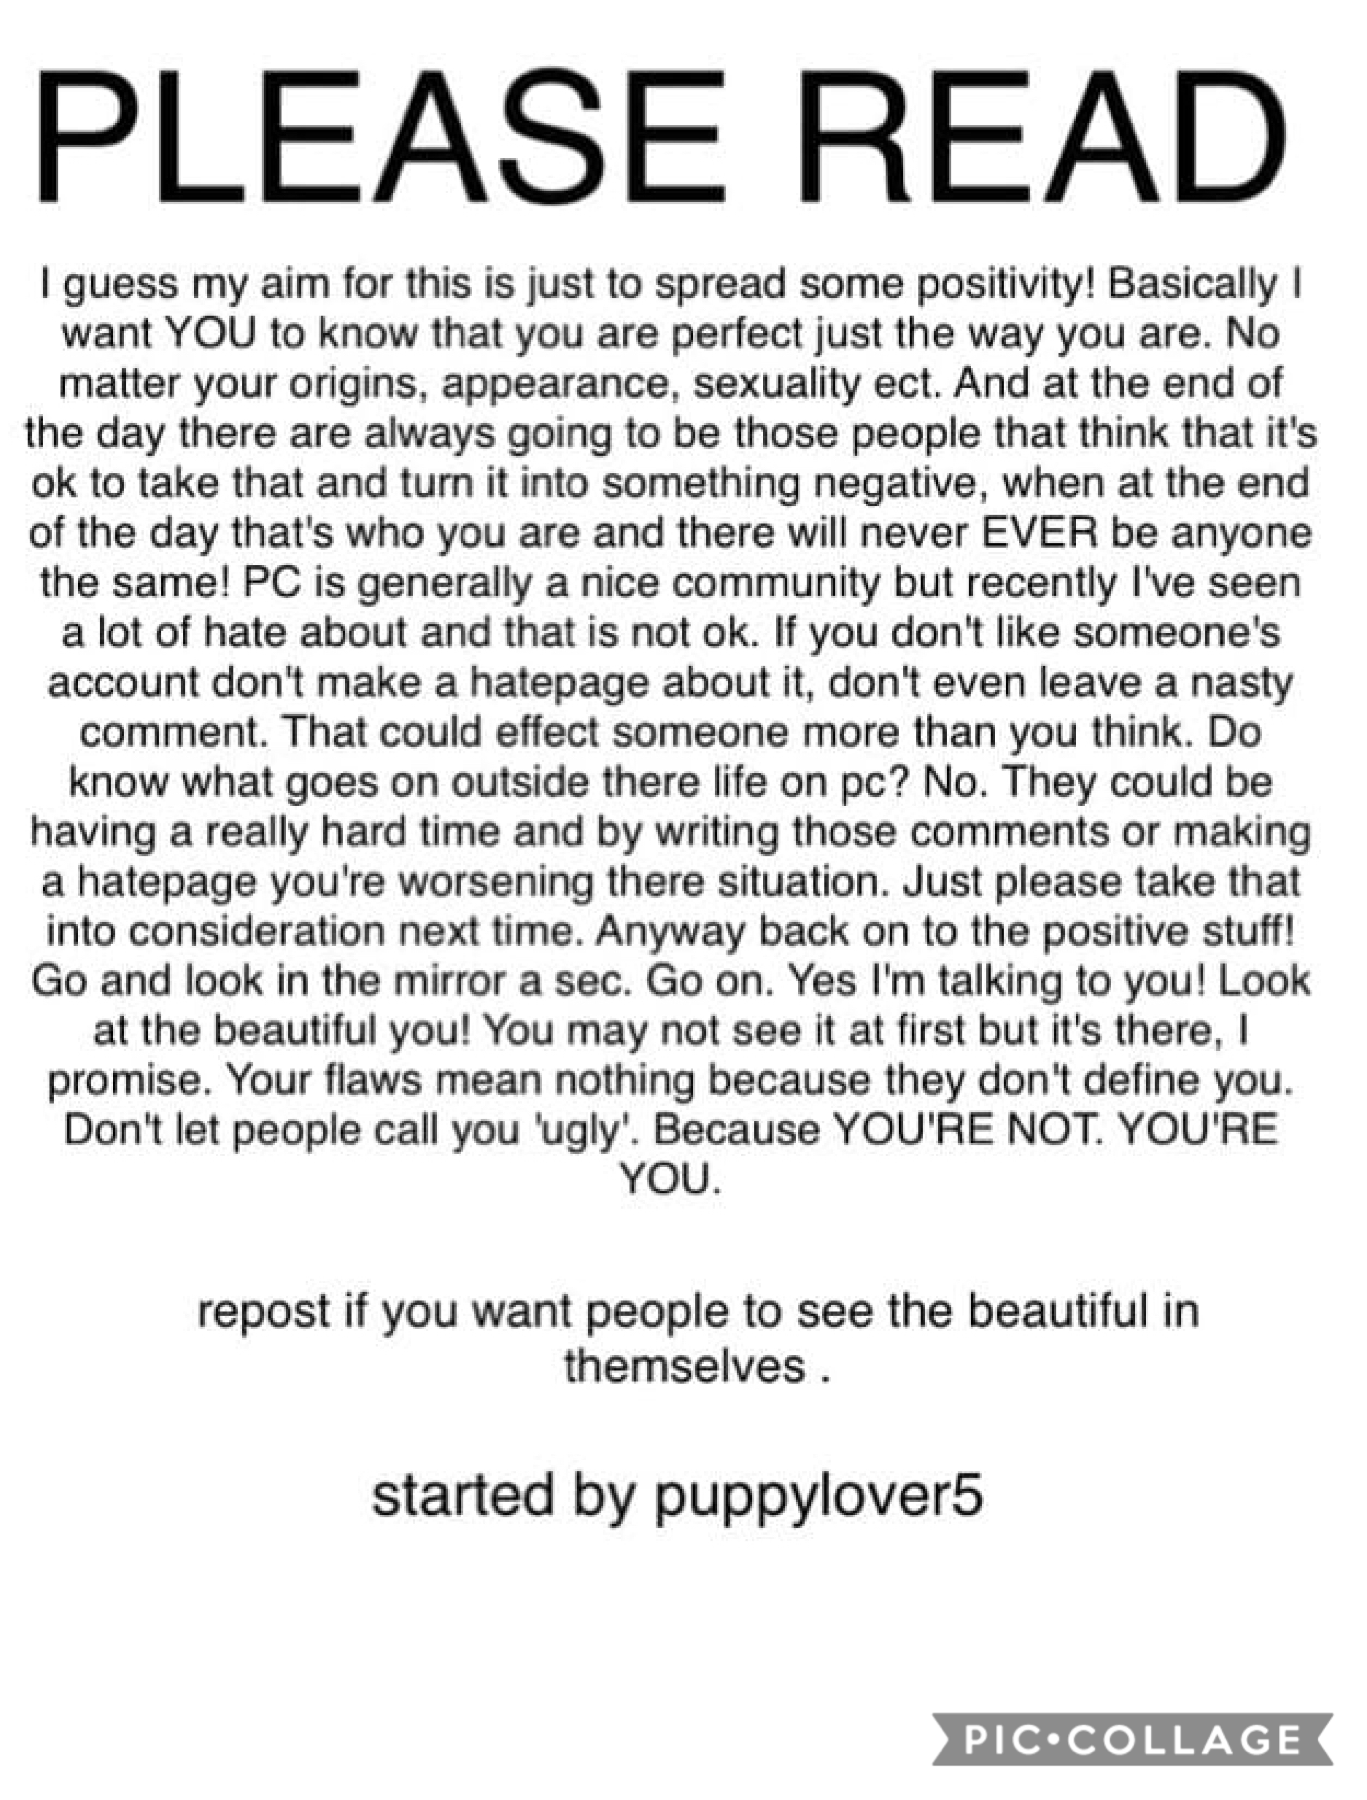 Shoutout to puppylover5